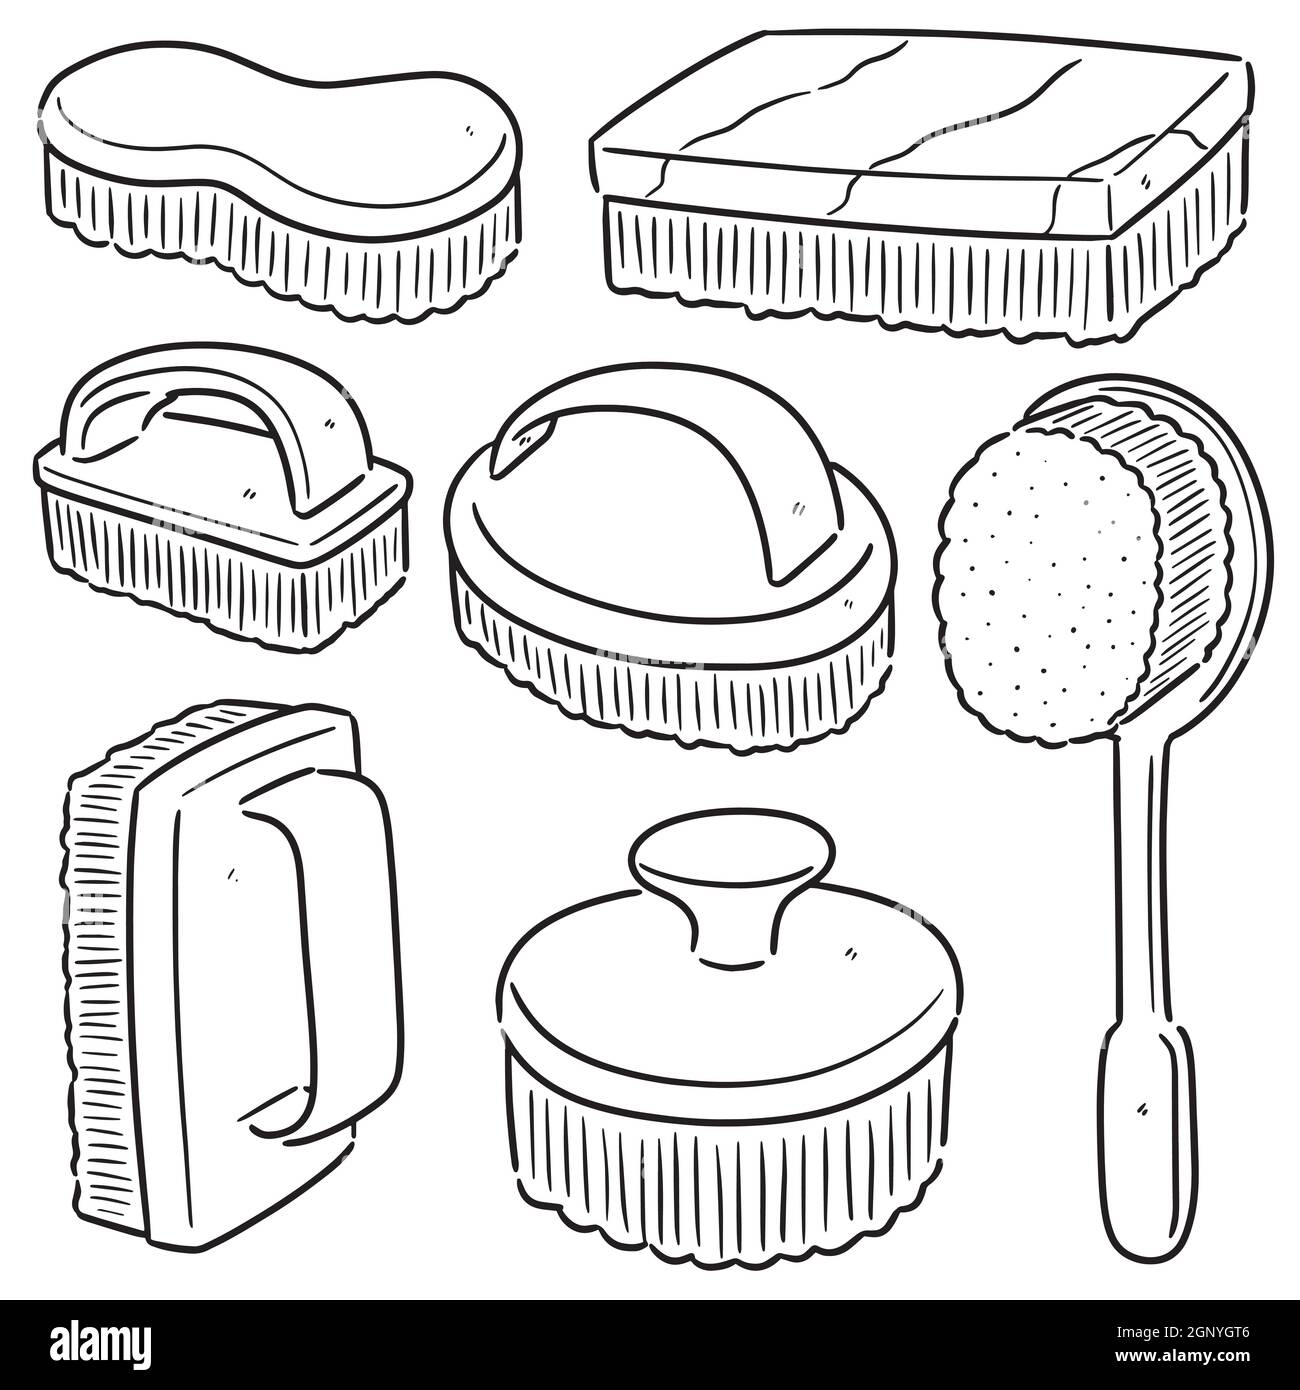 vector set of cleaning brush Stock Vector